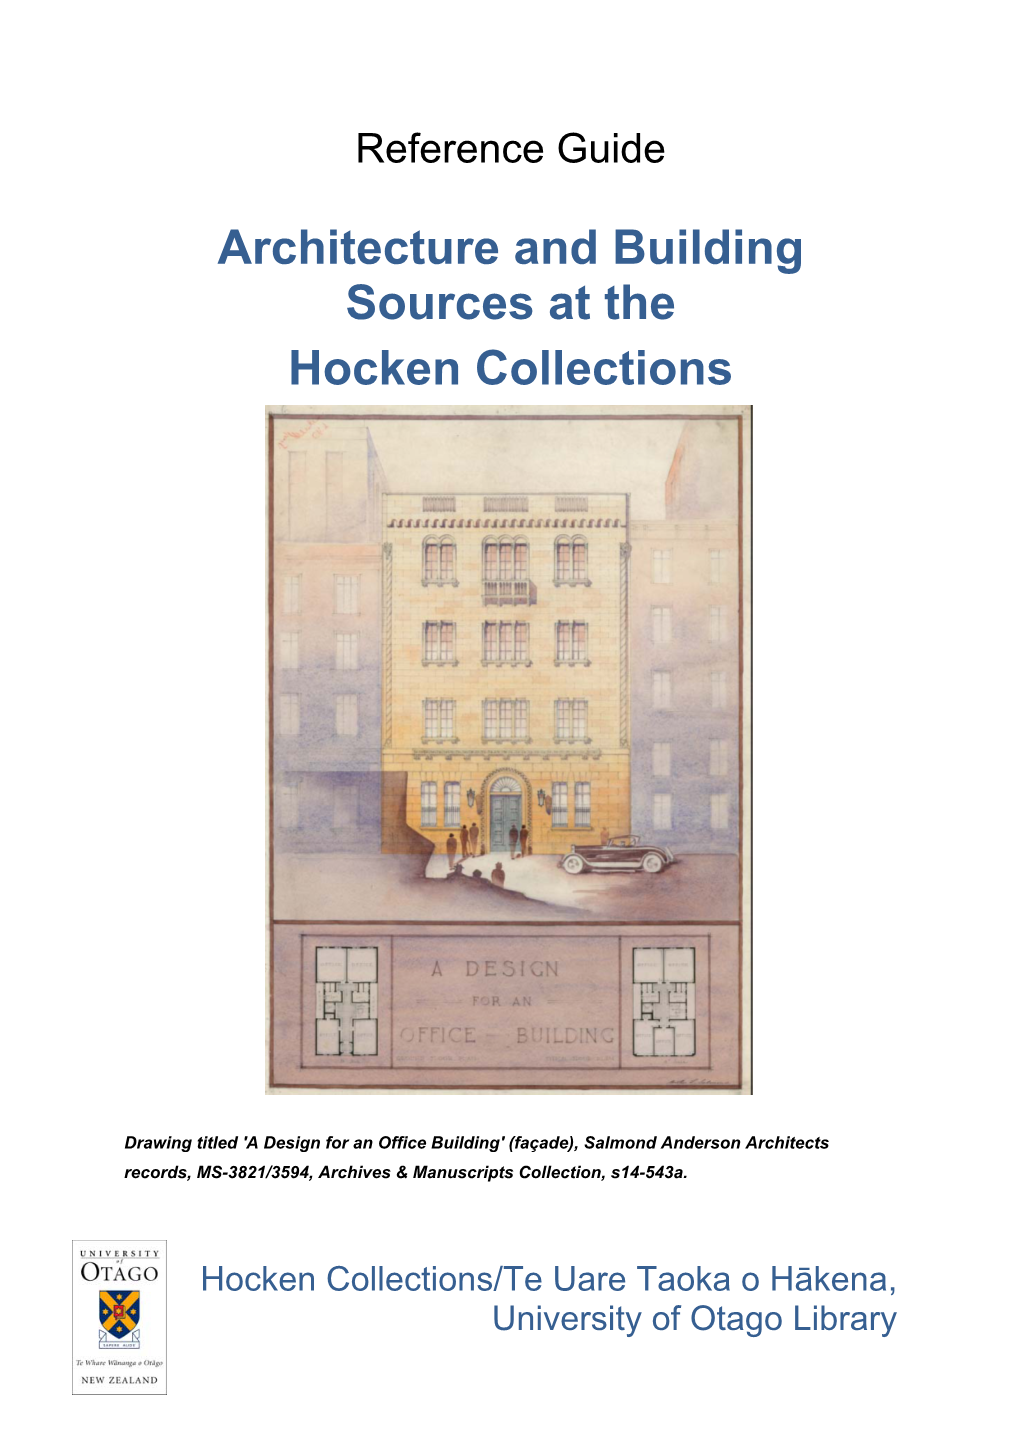 Architecture and Building Sources at the Hocken Collections